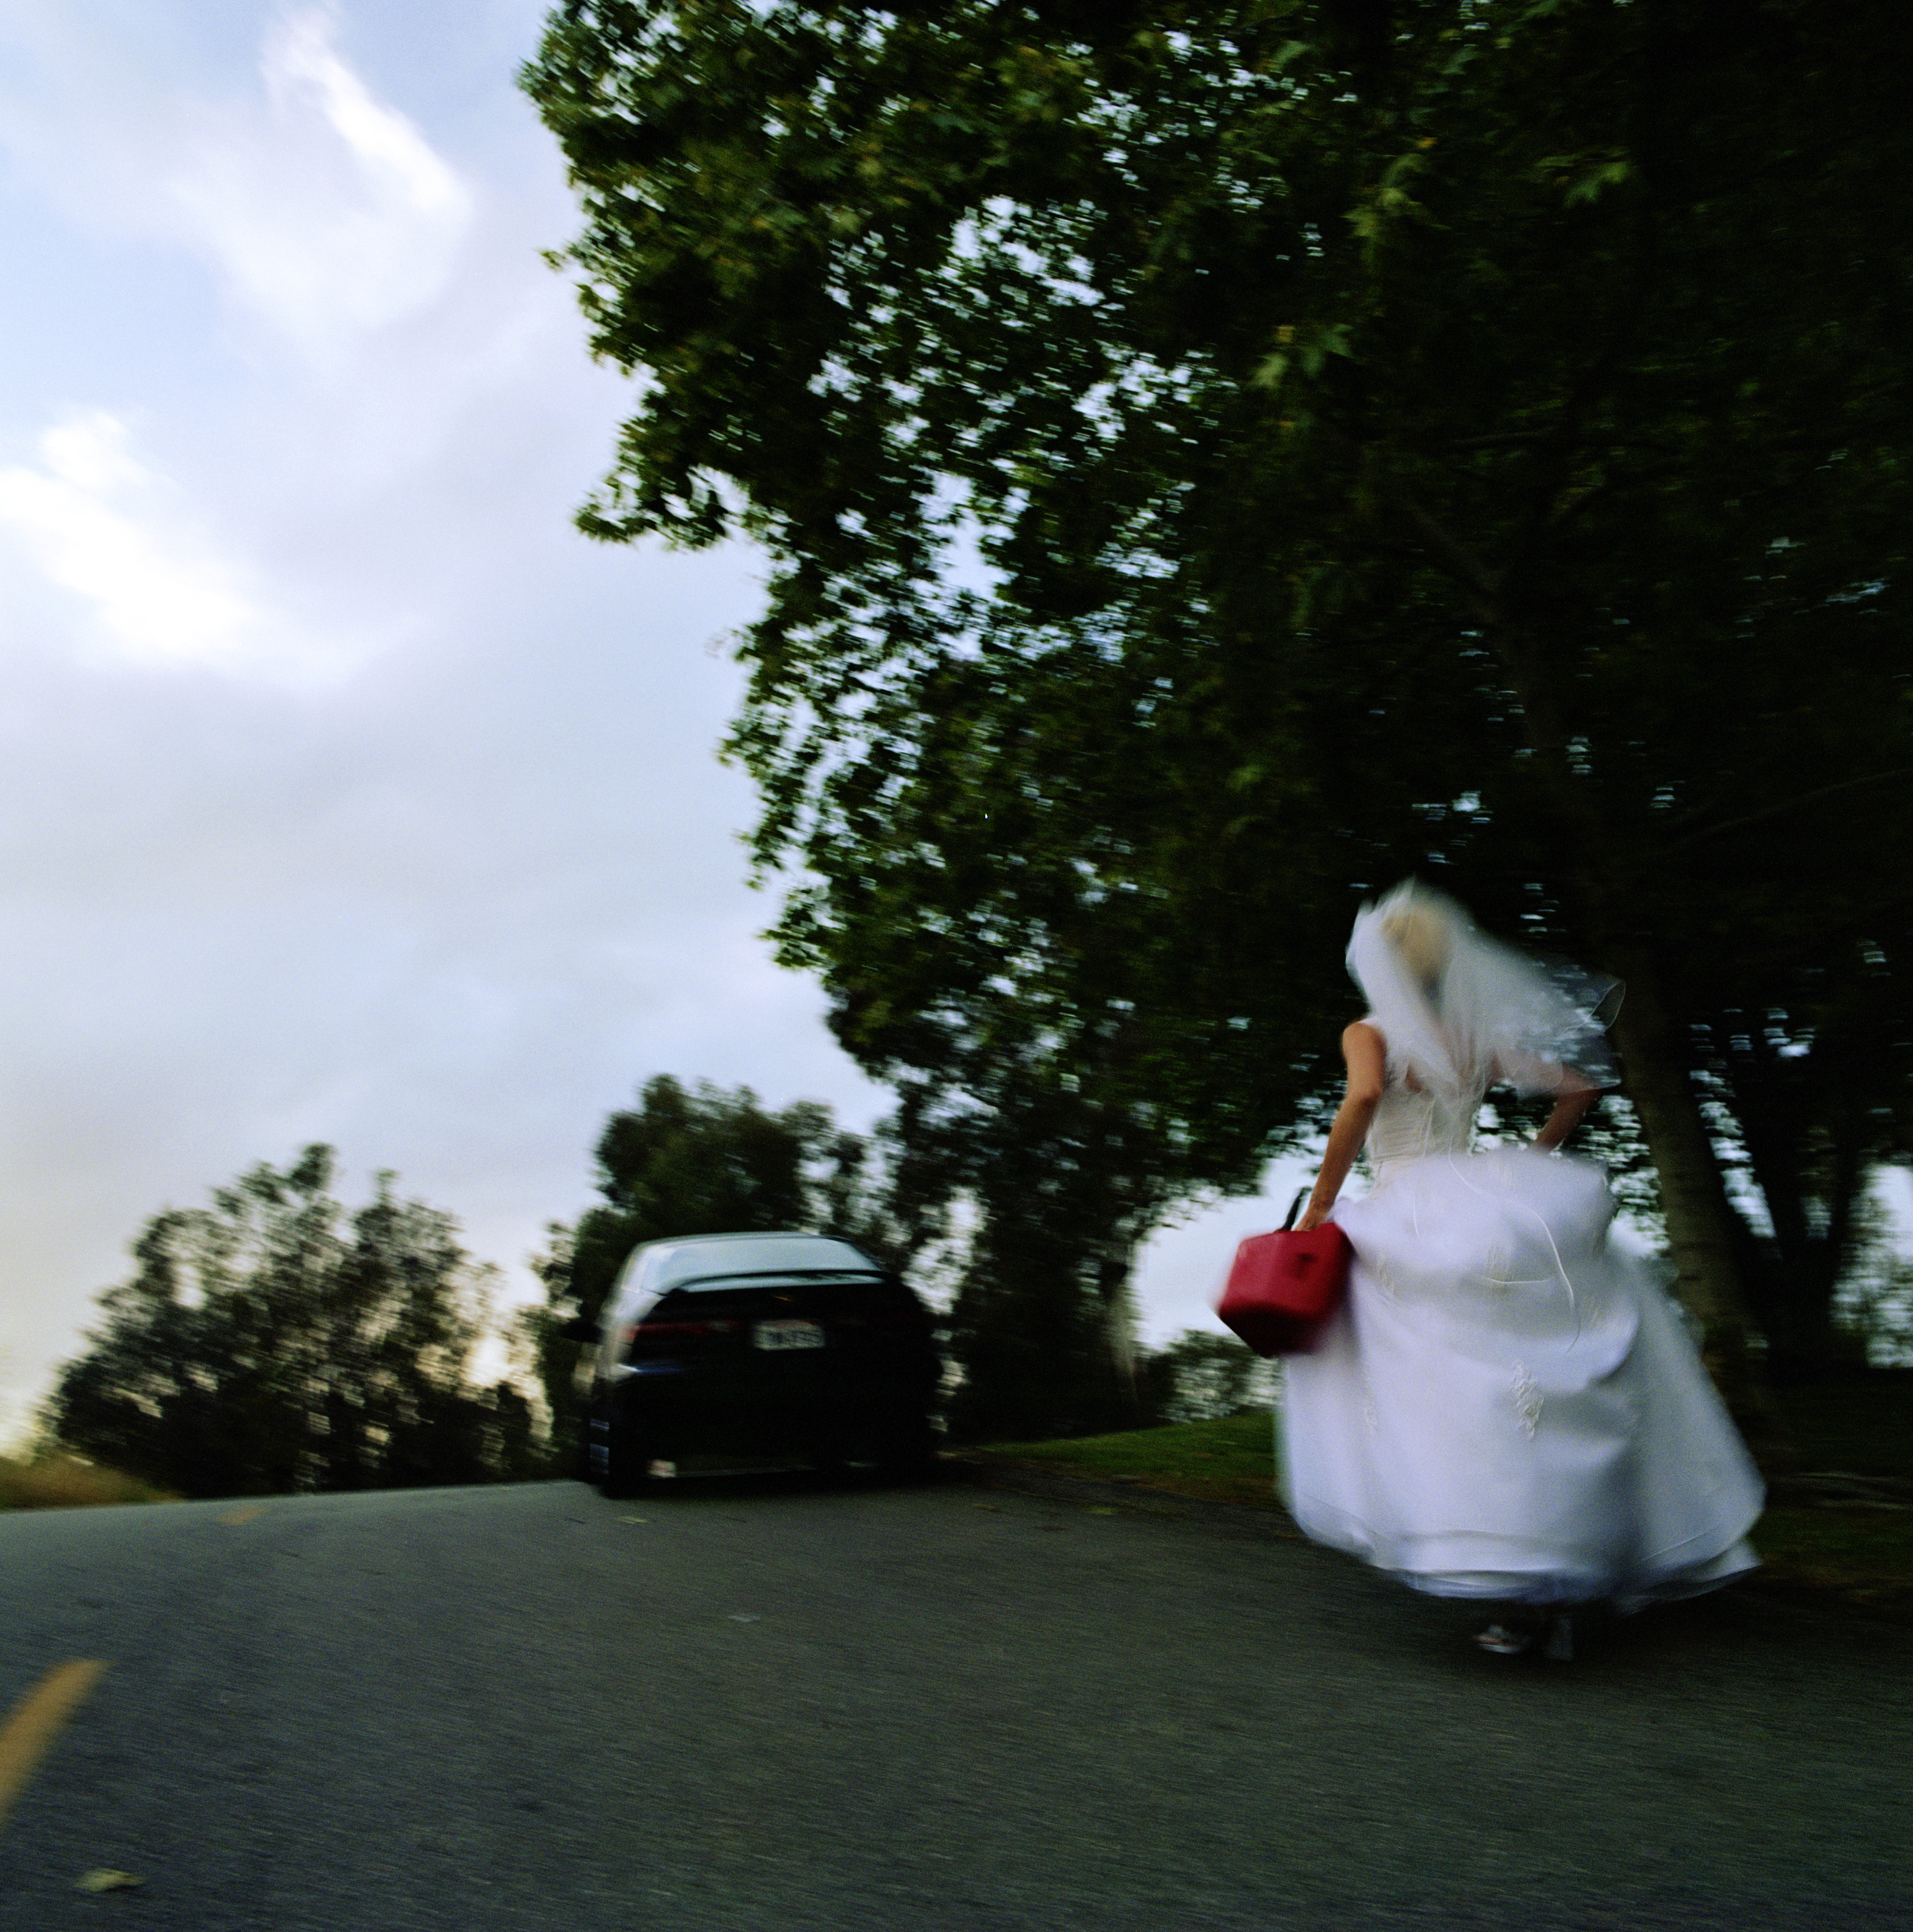 The bride runs away from the wedding | Source: Getty Images